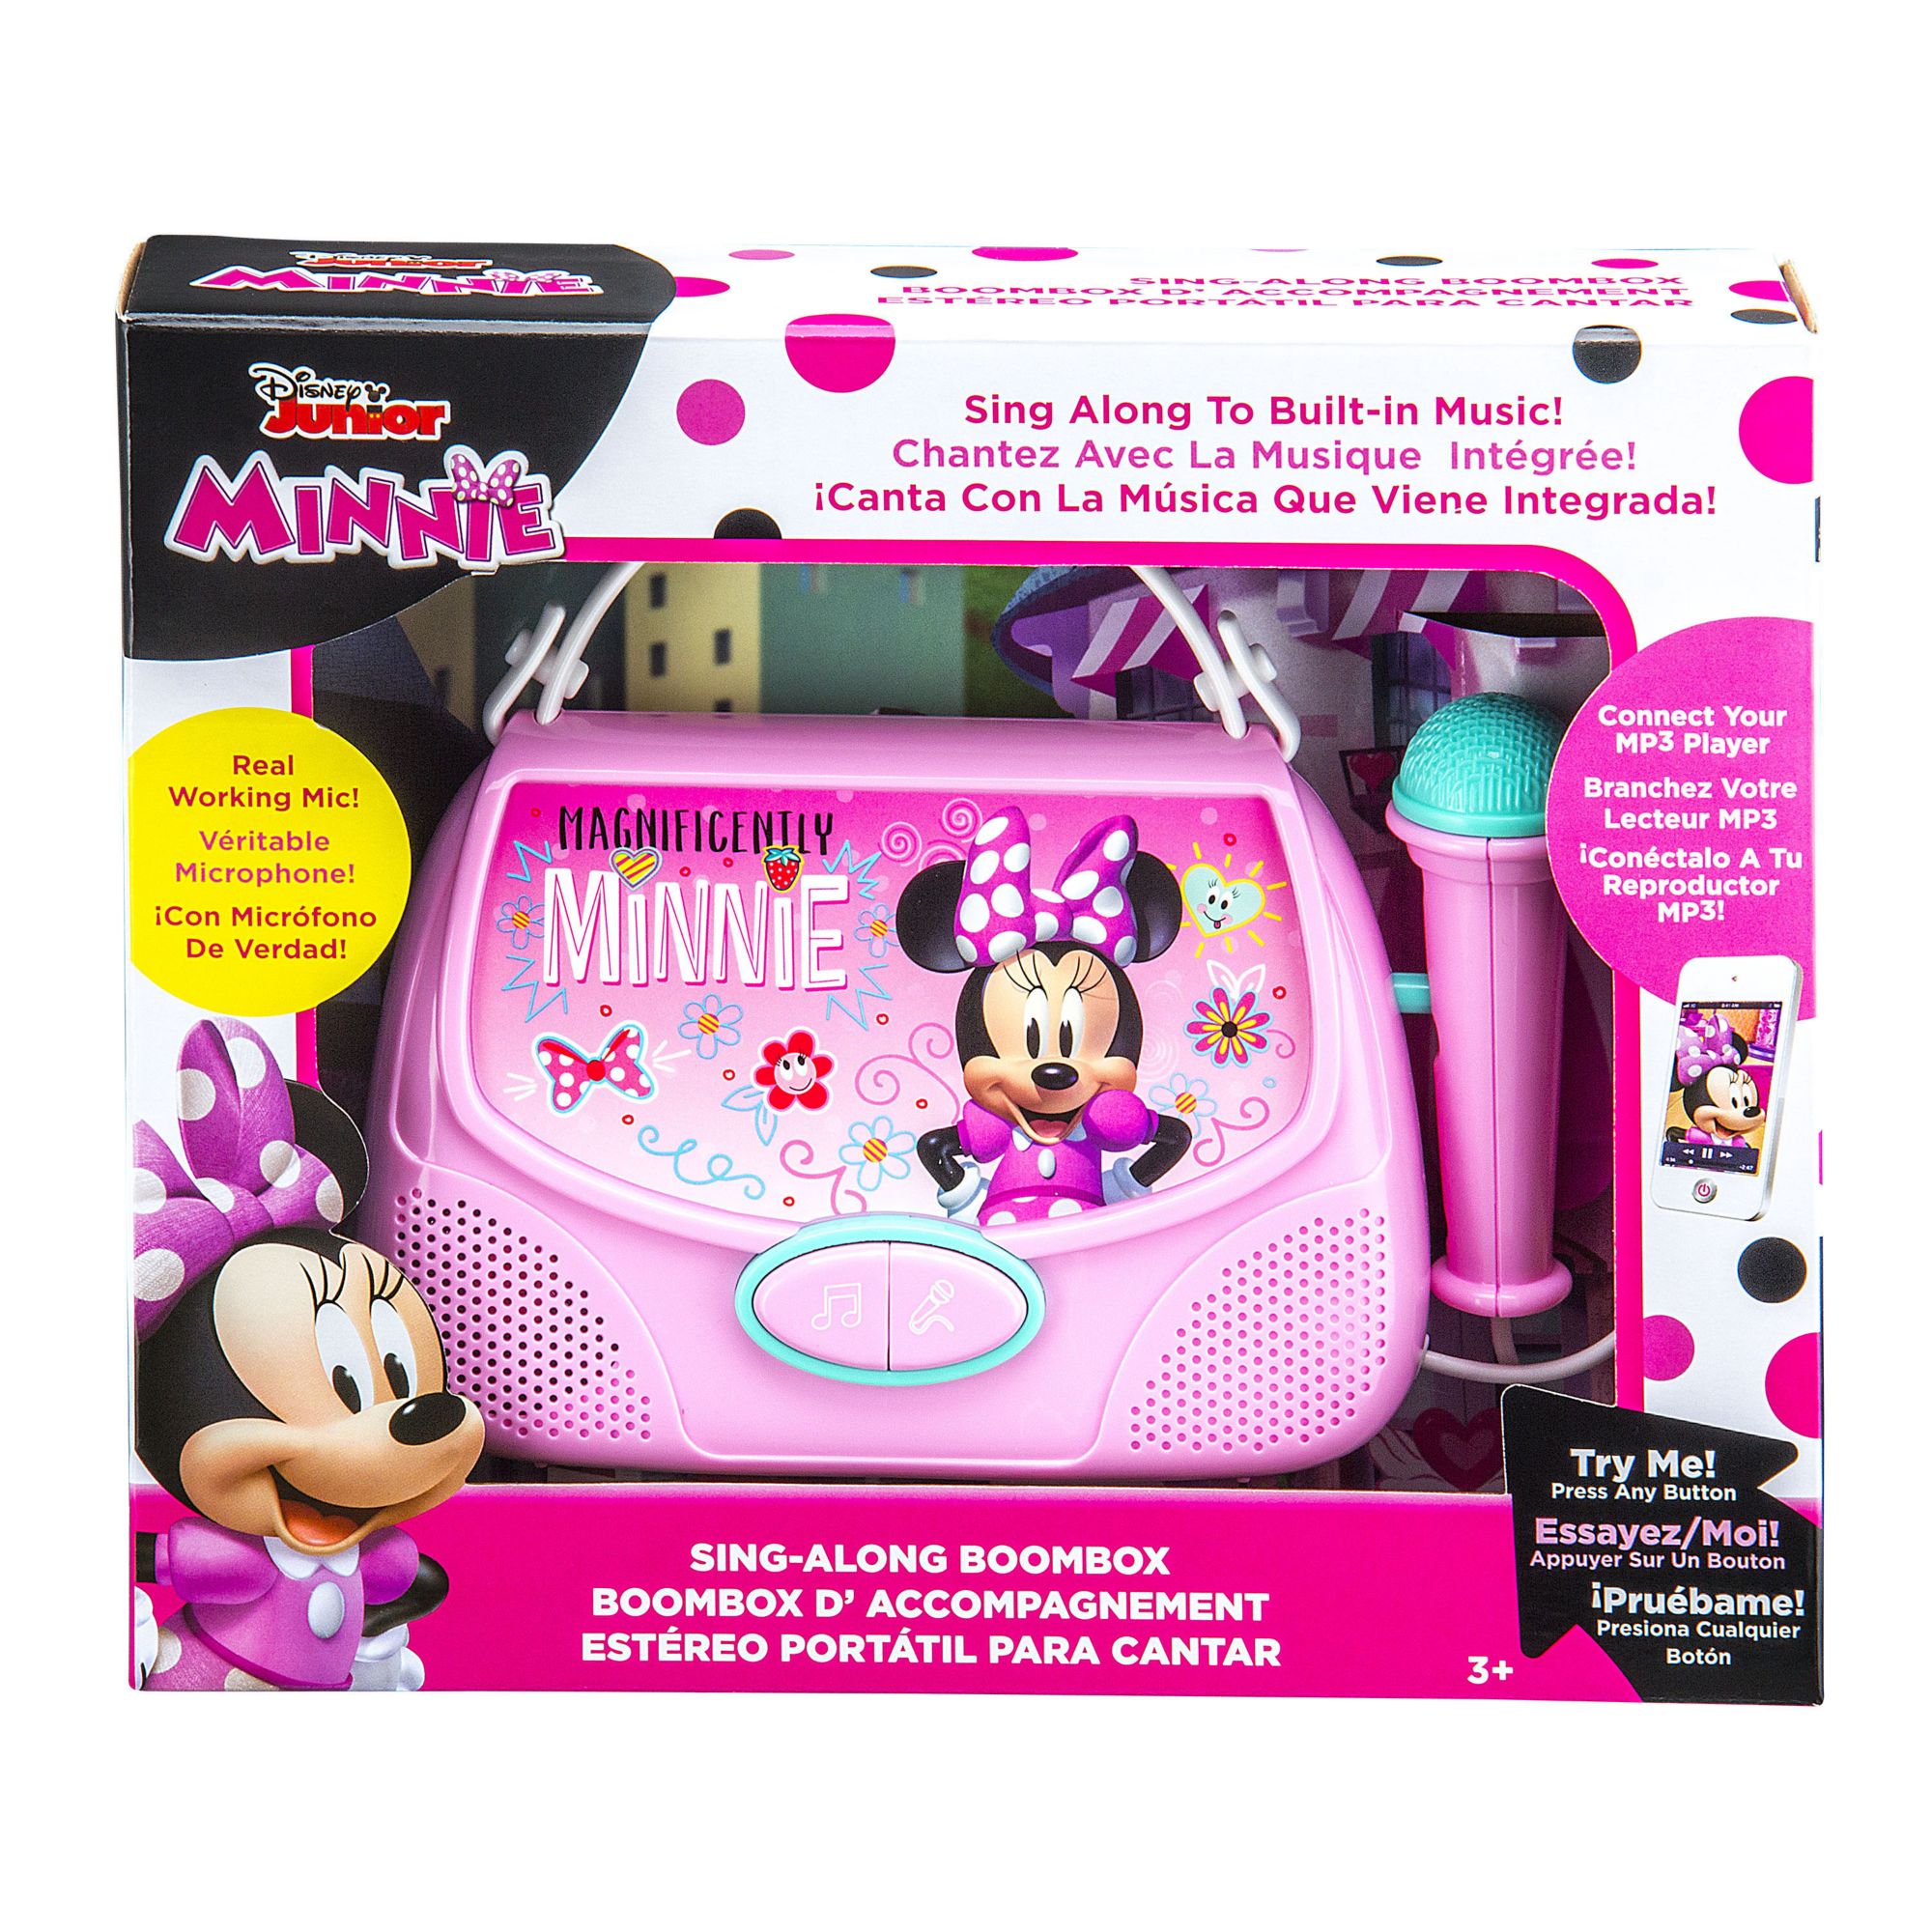 Sing Along Boombox - Minnie Mouse